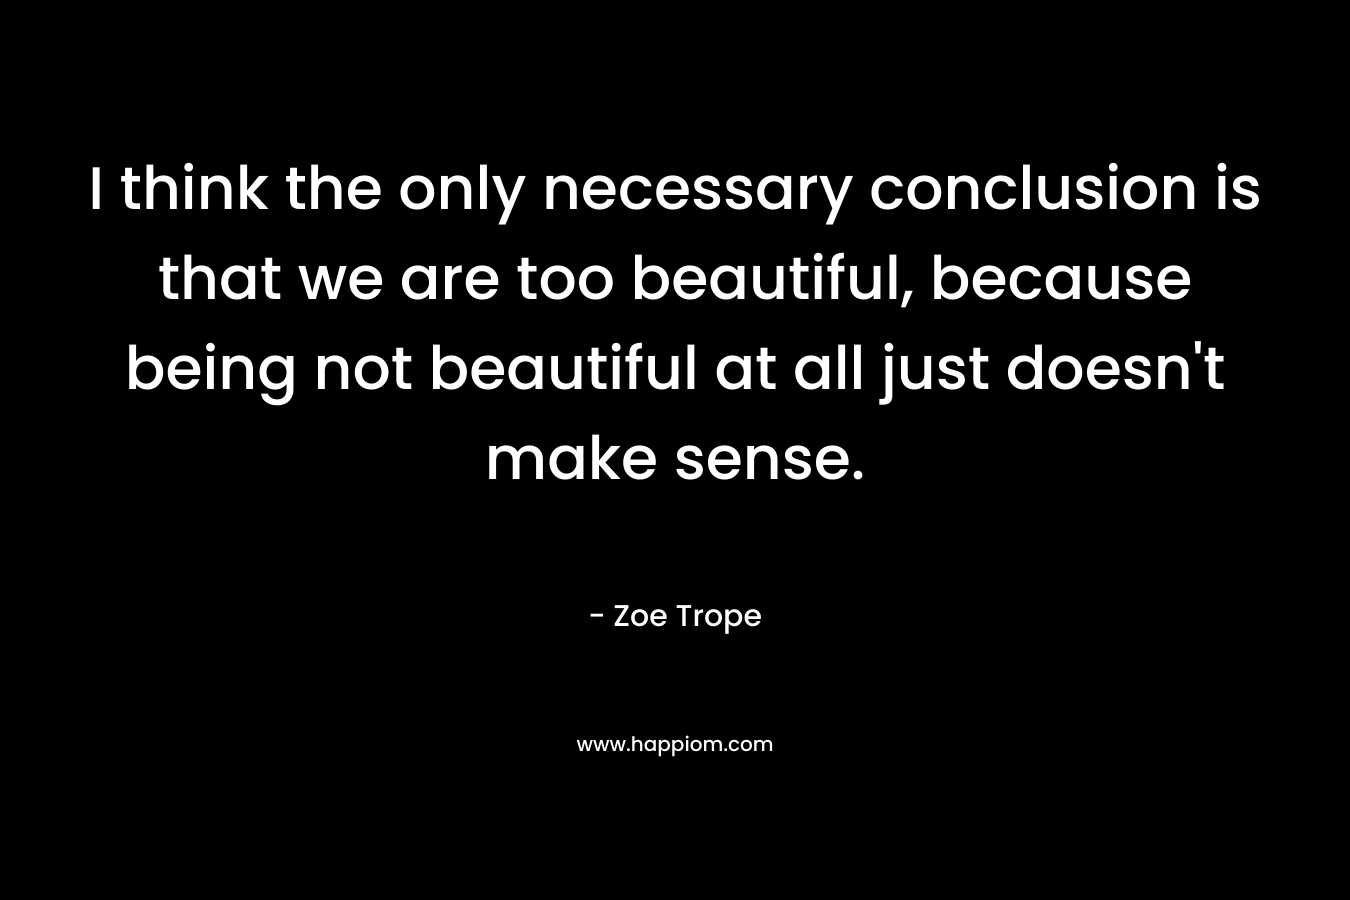 I think the only necessary conclusion is that we are too beautiful, because being not beautiful at all just doesn't make sense.